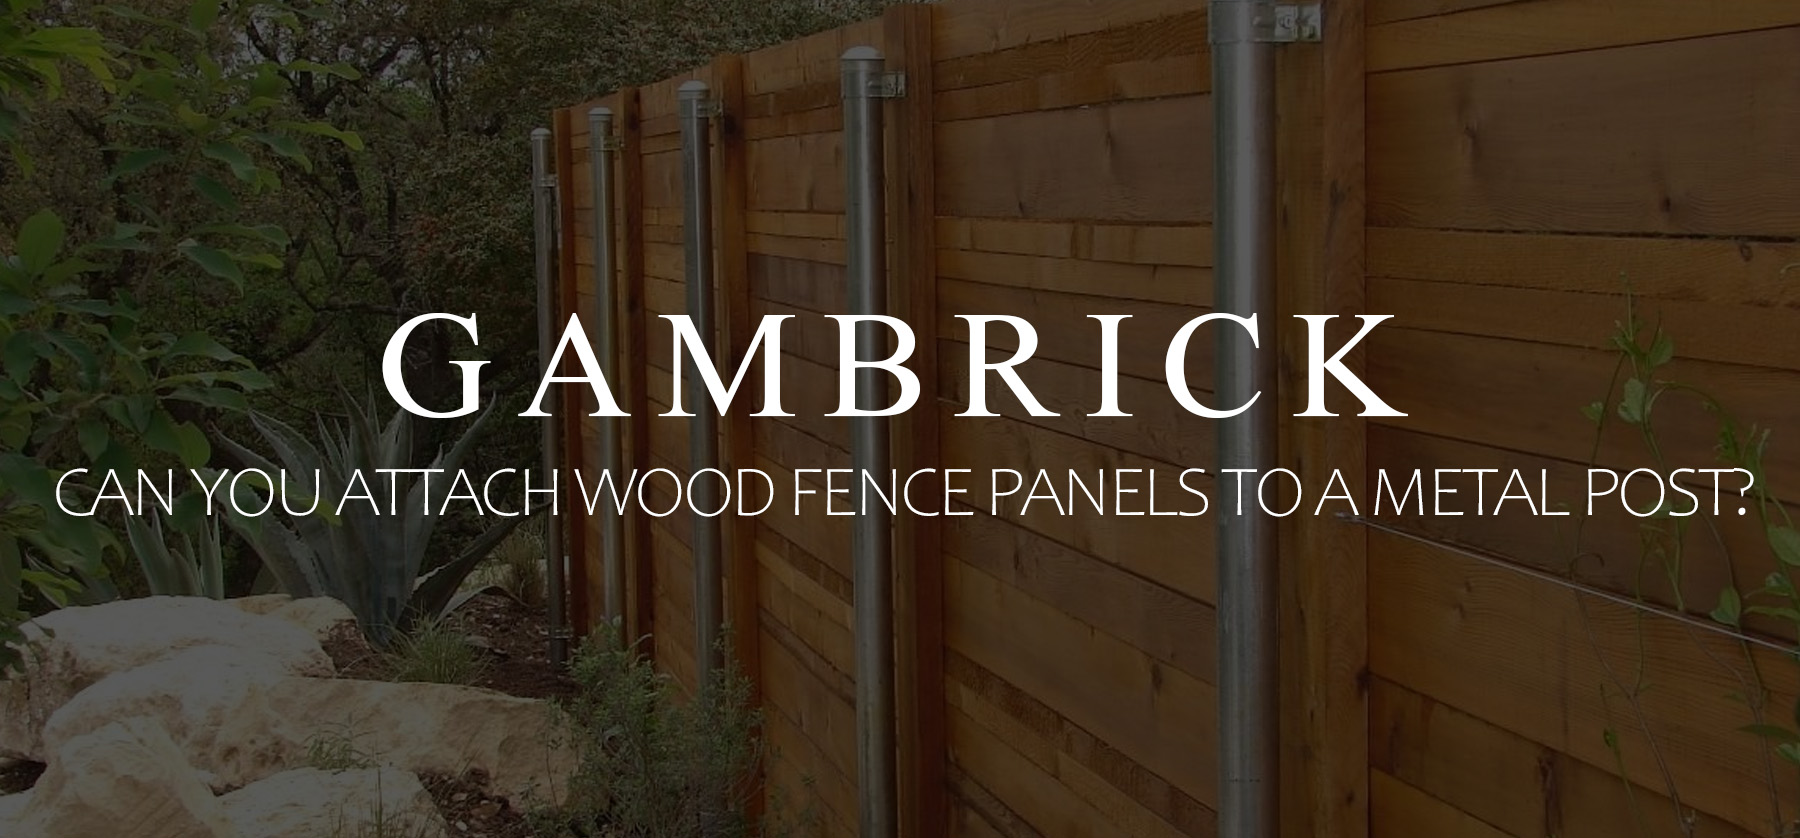 can you attach wood fence panels to metal posts banner 